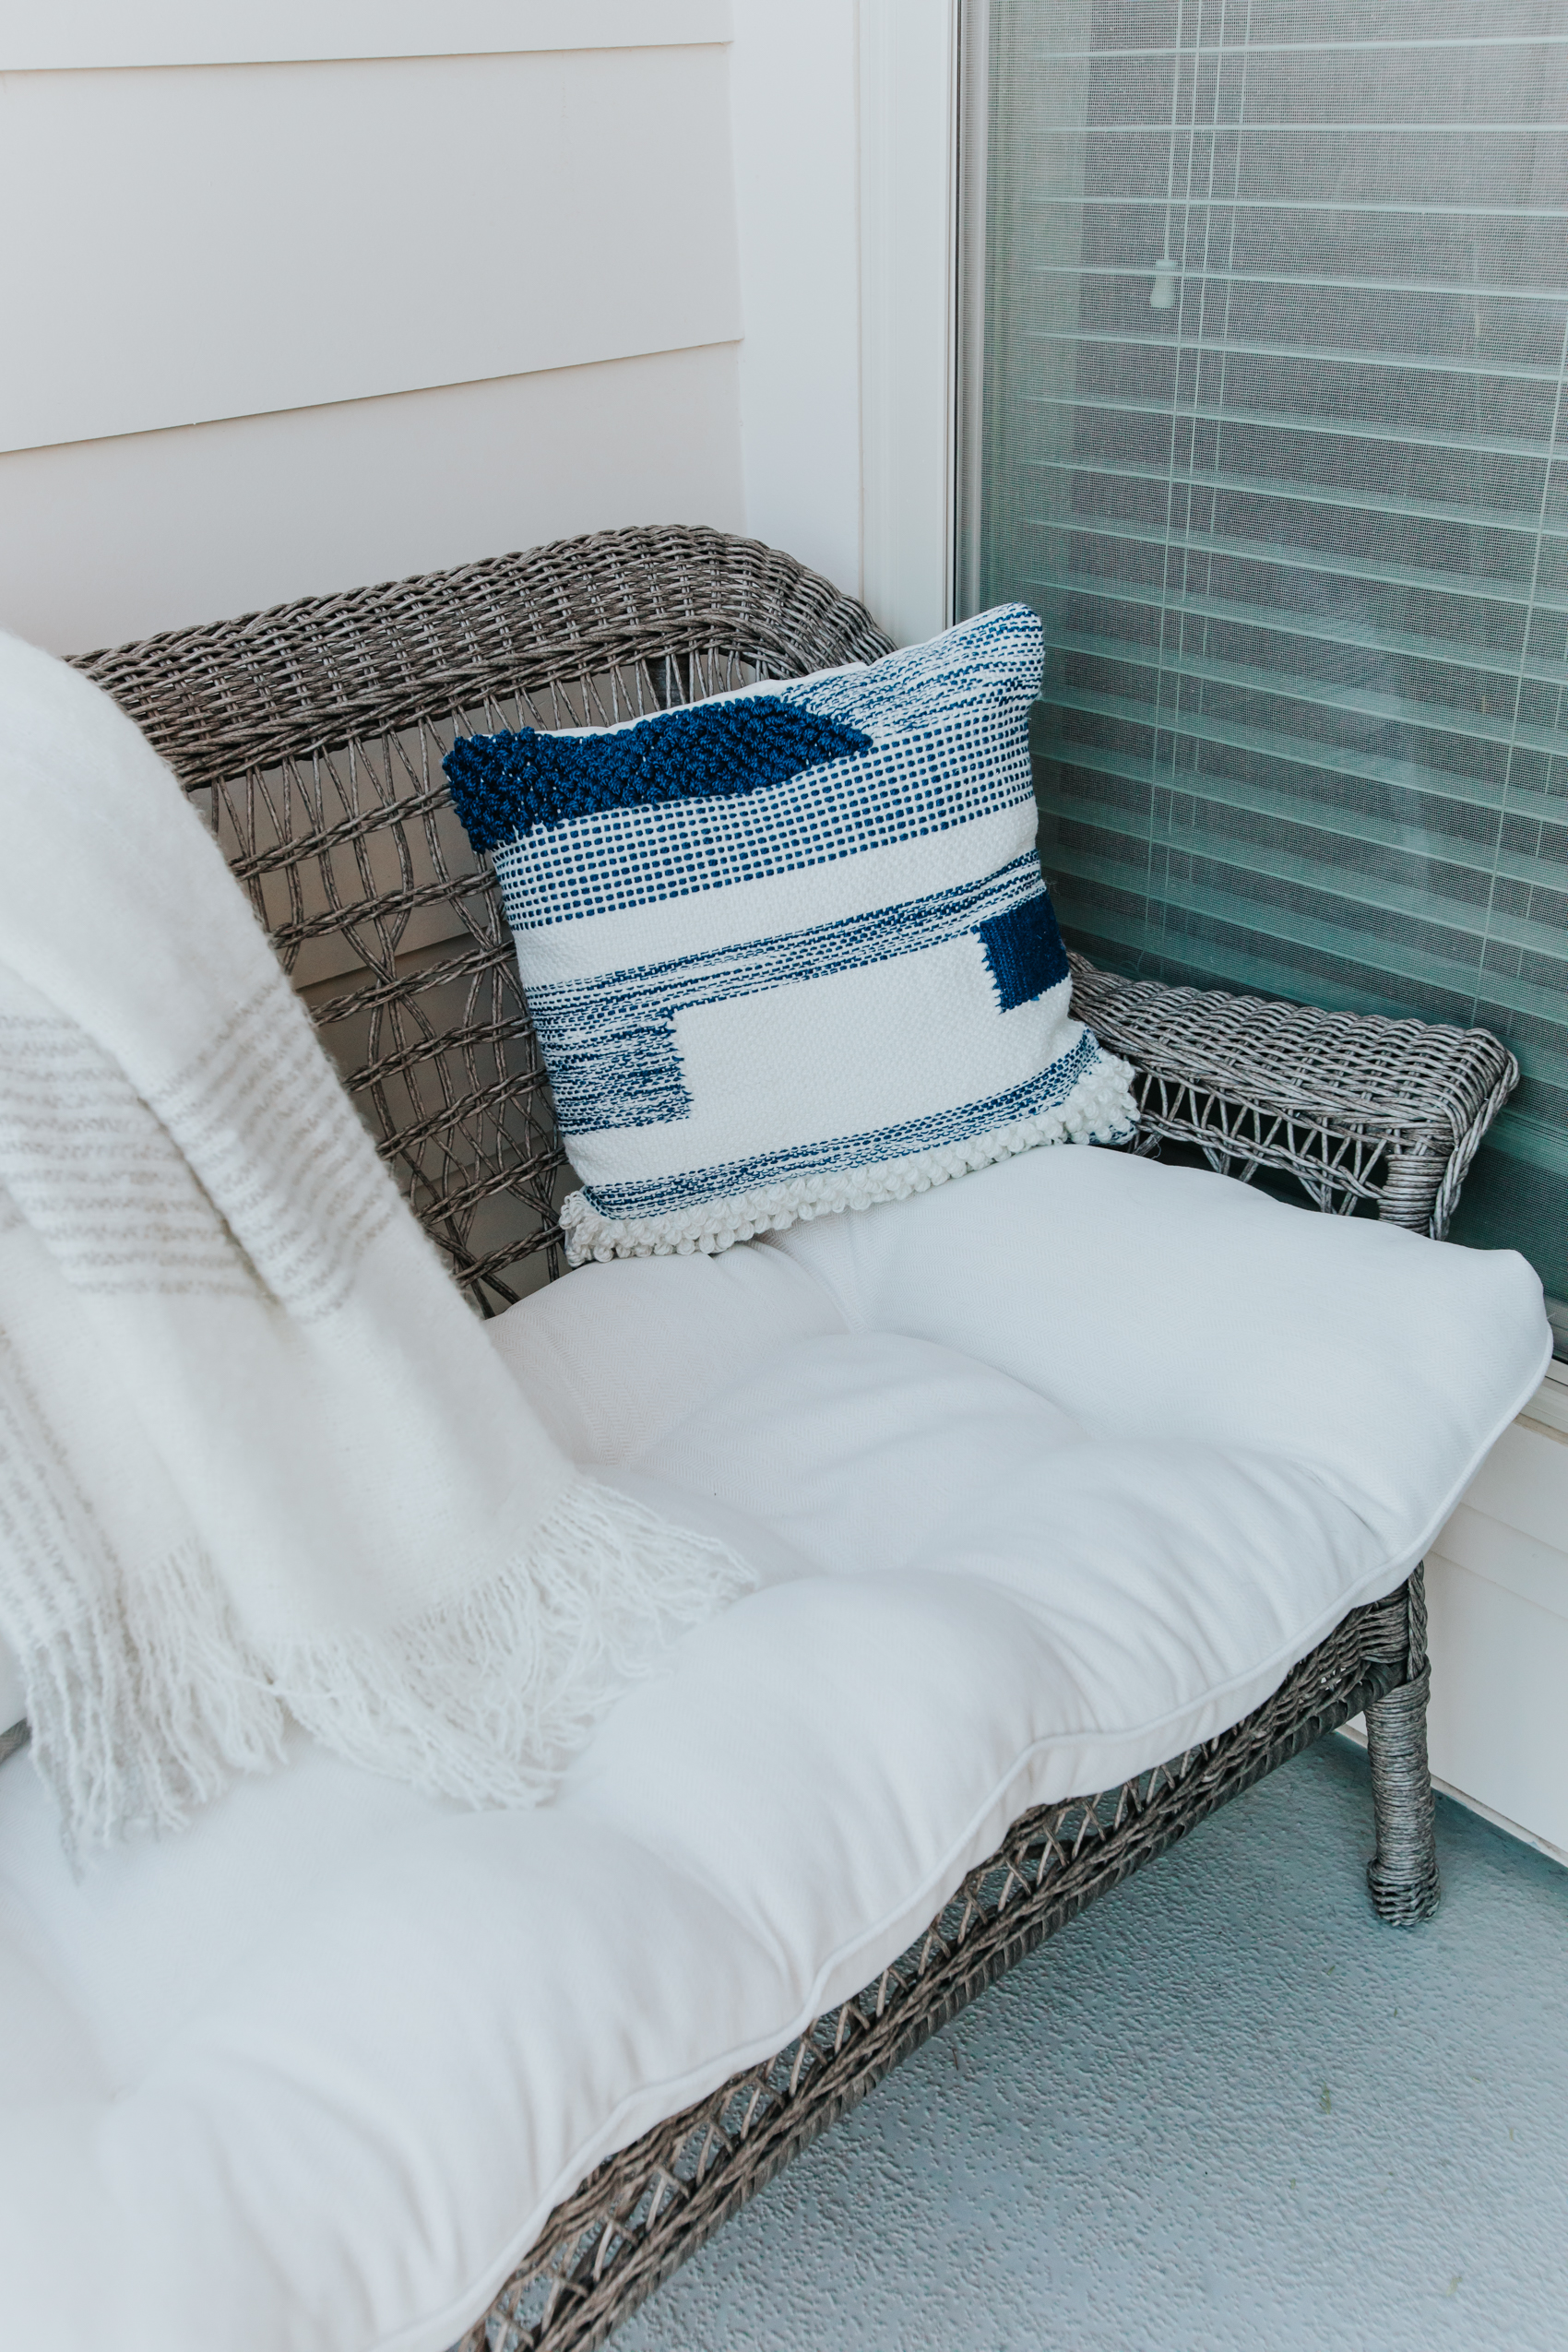 Apartment patio space with a gray wicker settee, white herringbone cushion, blue throw pillow and gray striped blanket